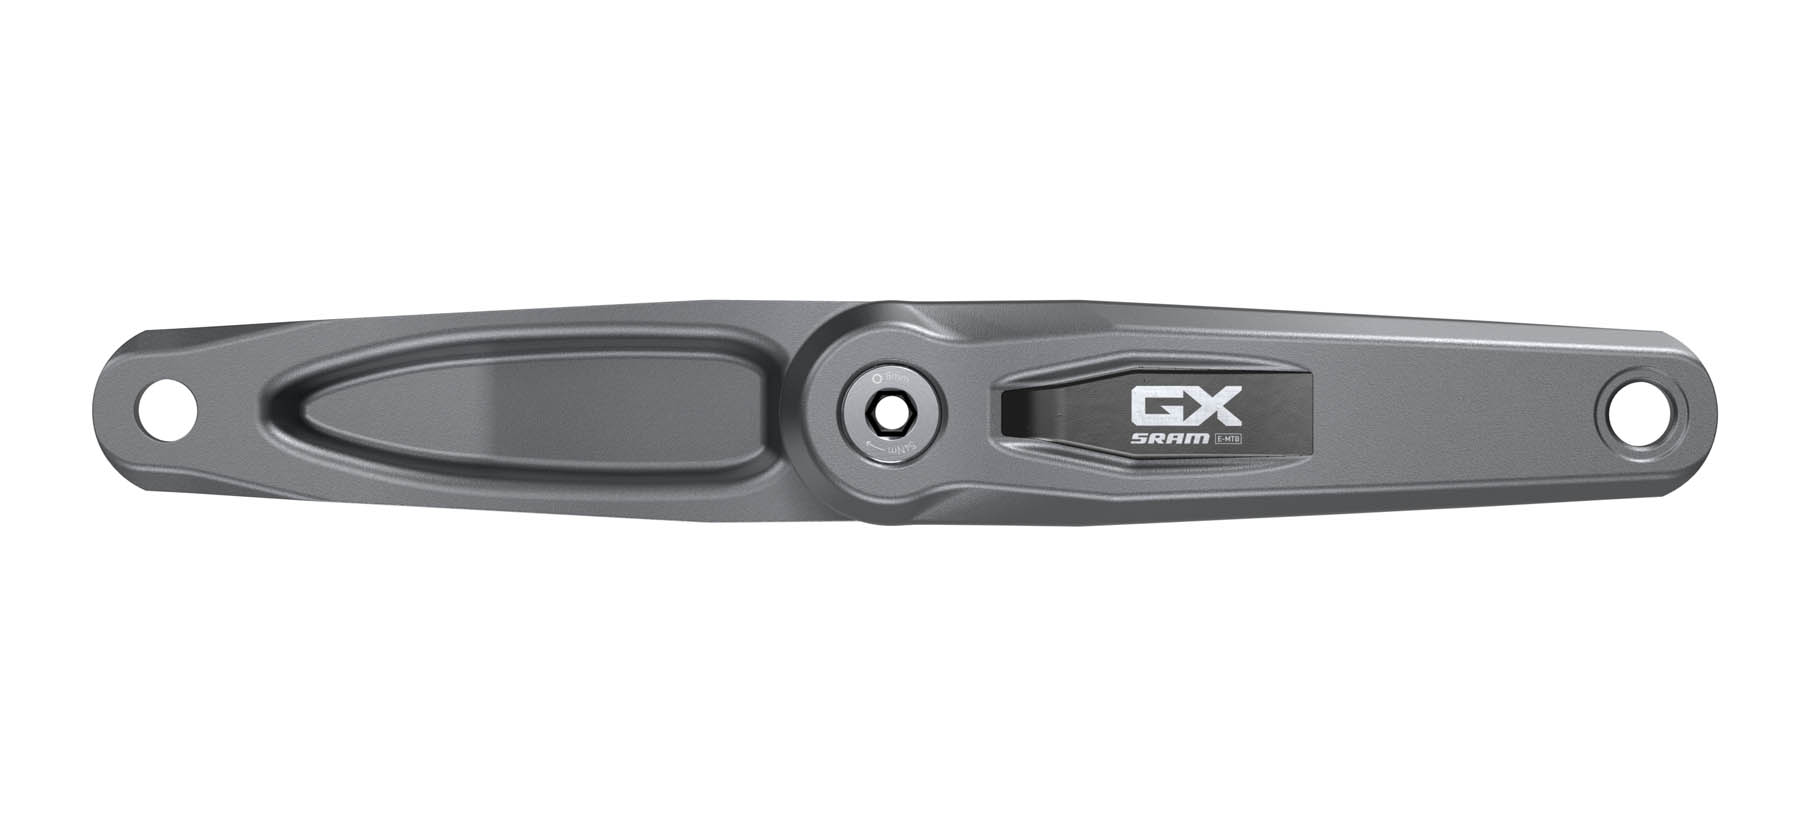 David Golay reviews the SRAM GX Transmission for Blister